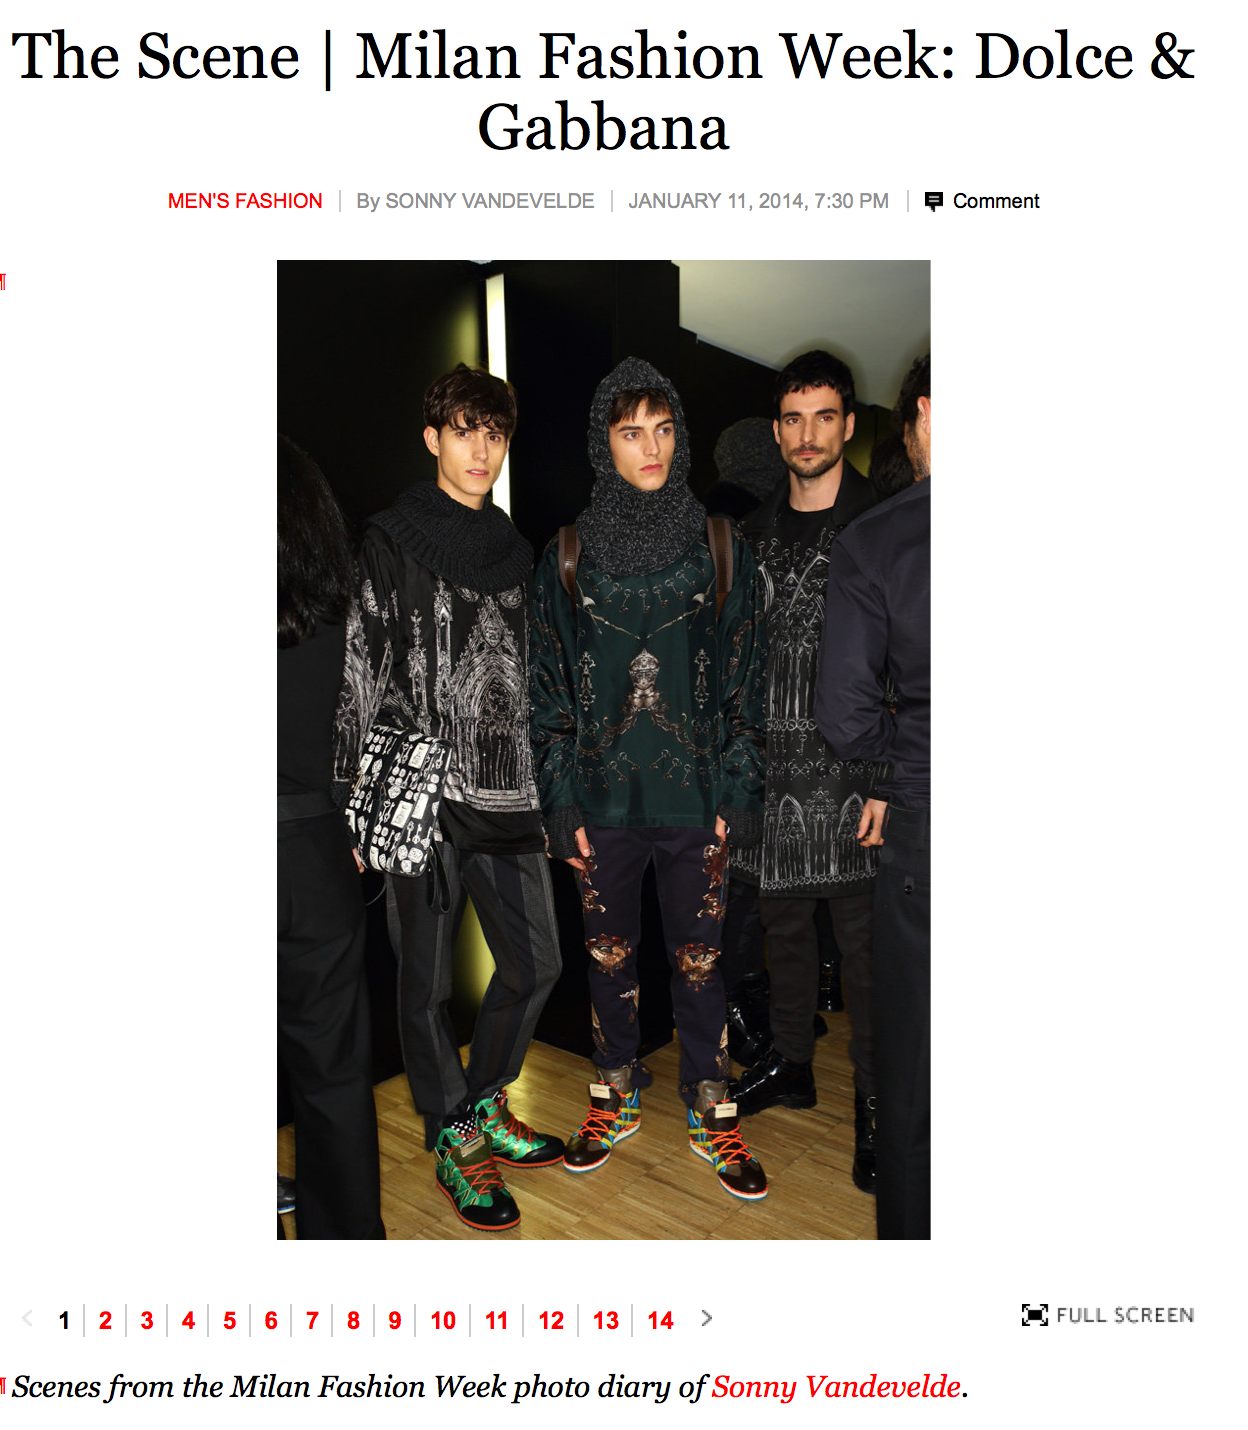 New York Times coverage I did off the Dolce & Gabbana Show